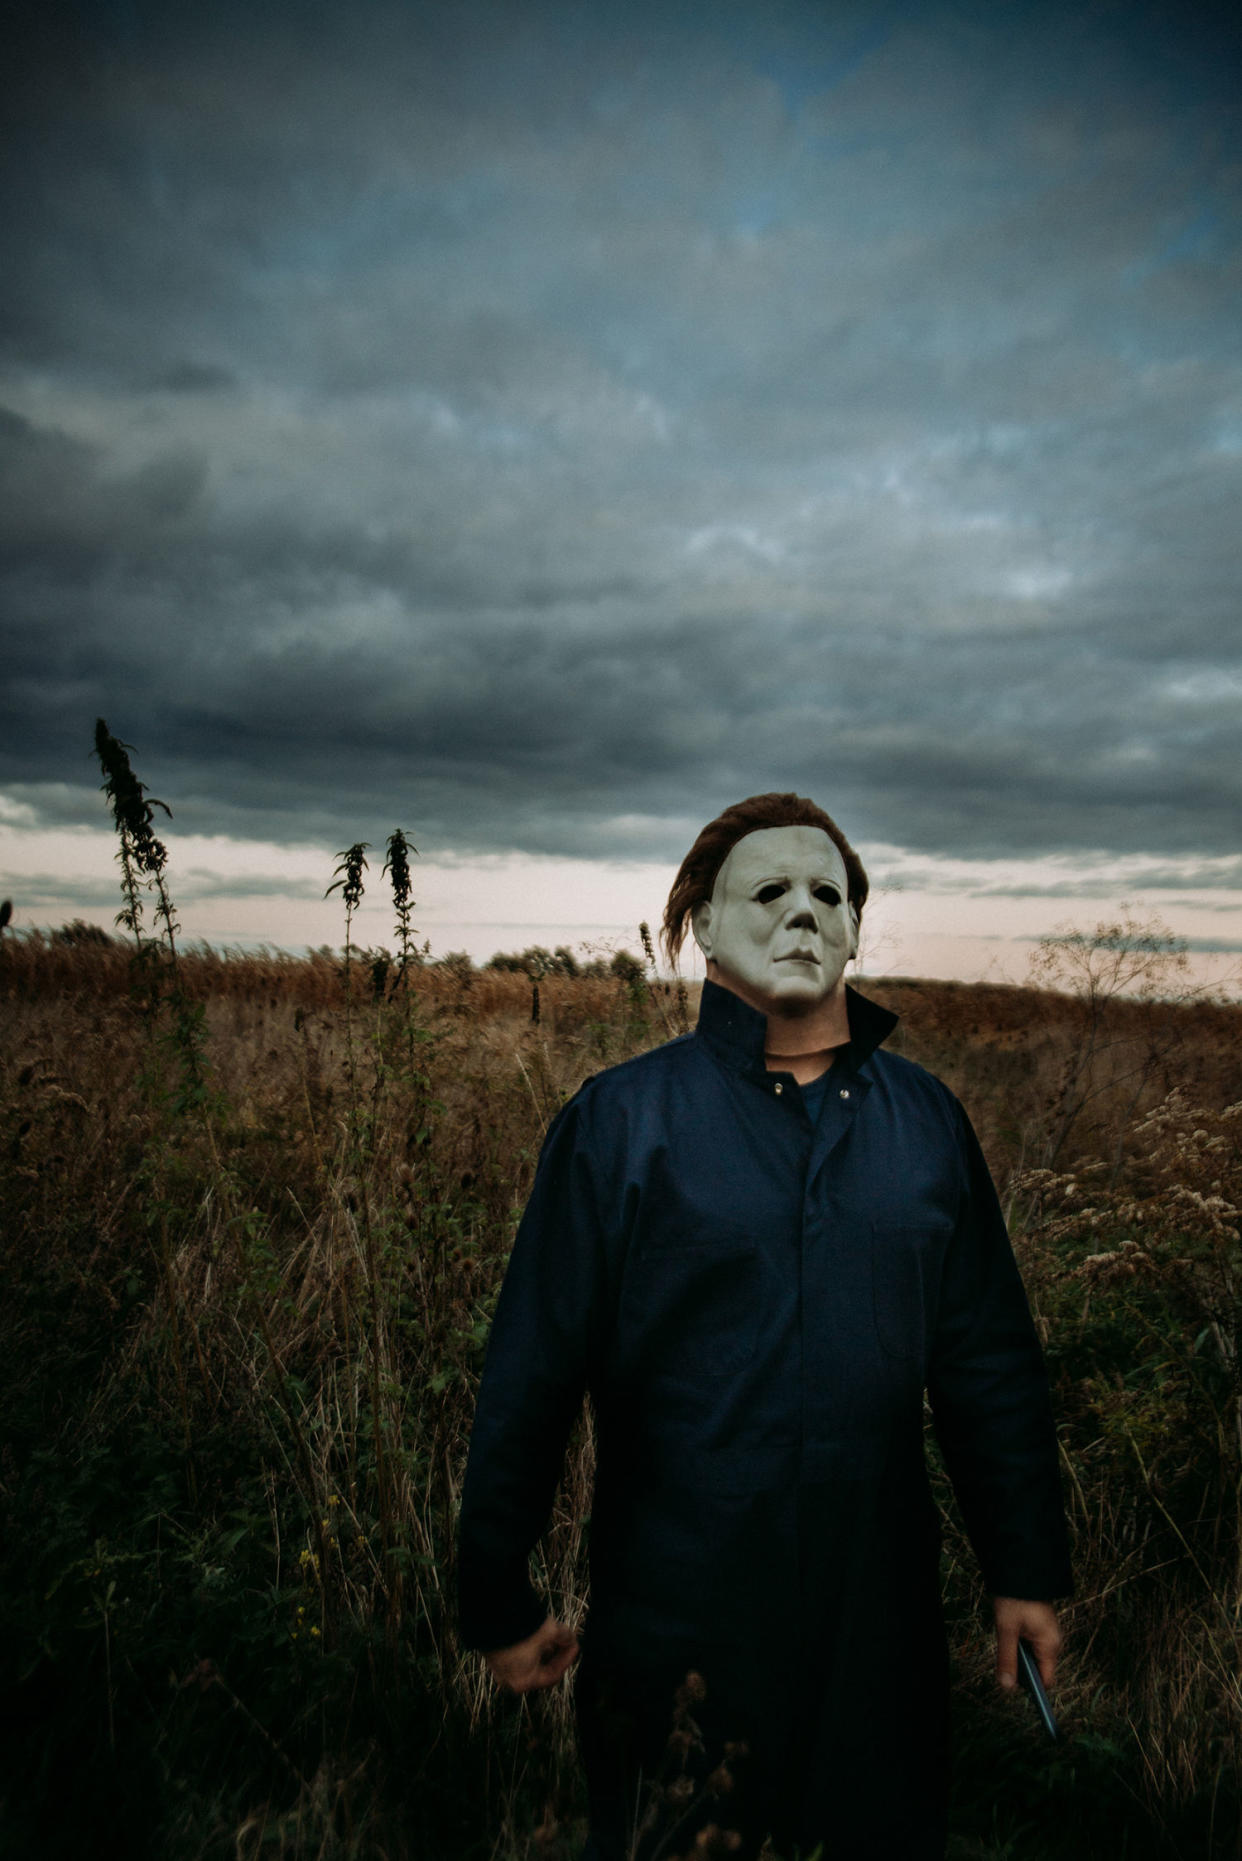 Evan Zimmerman has been dressing up as Michael Myers from 